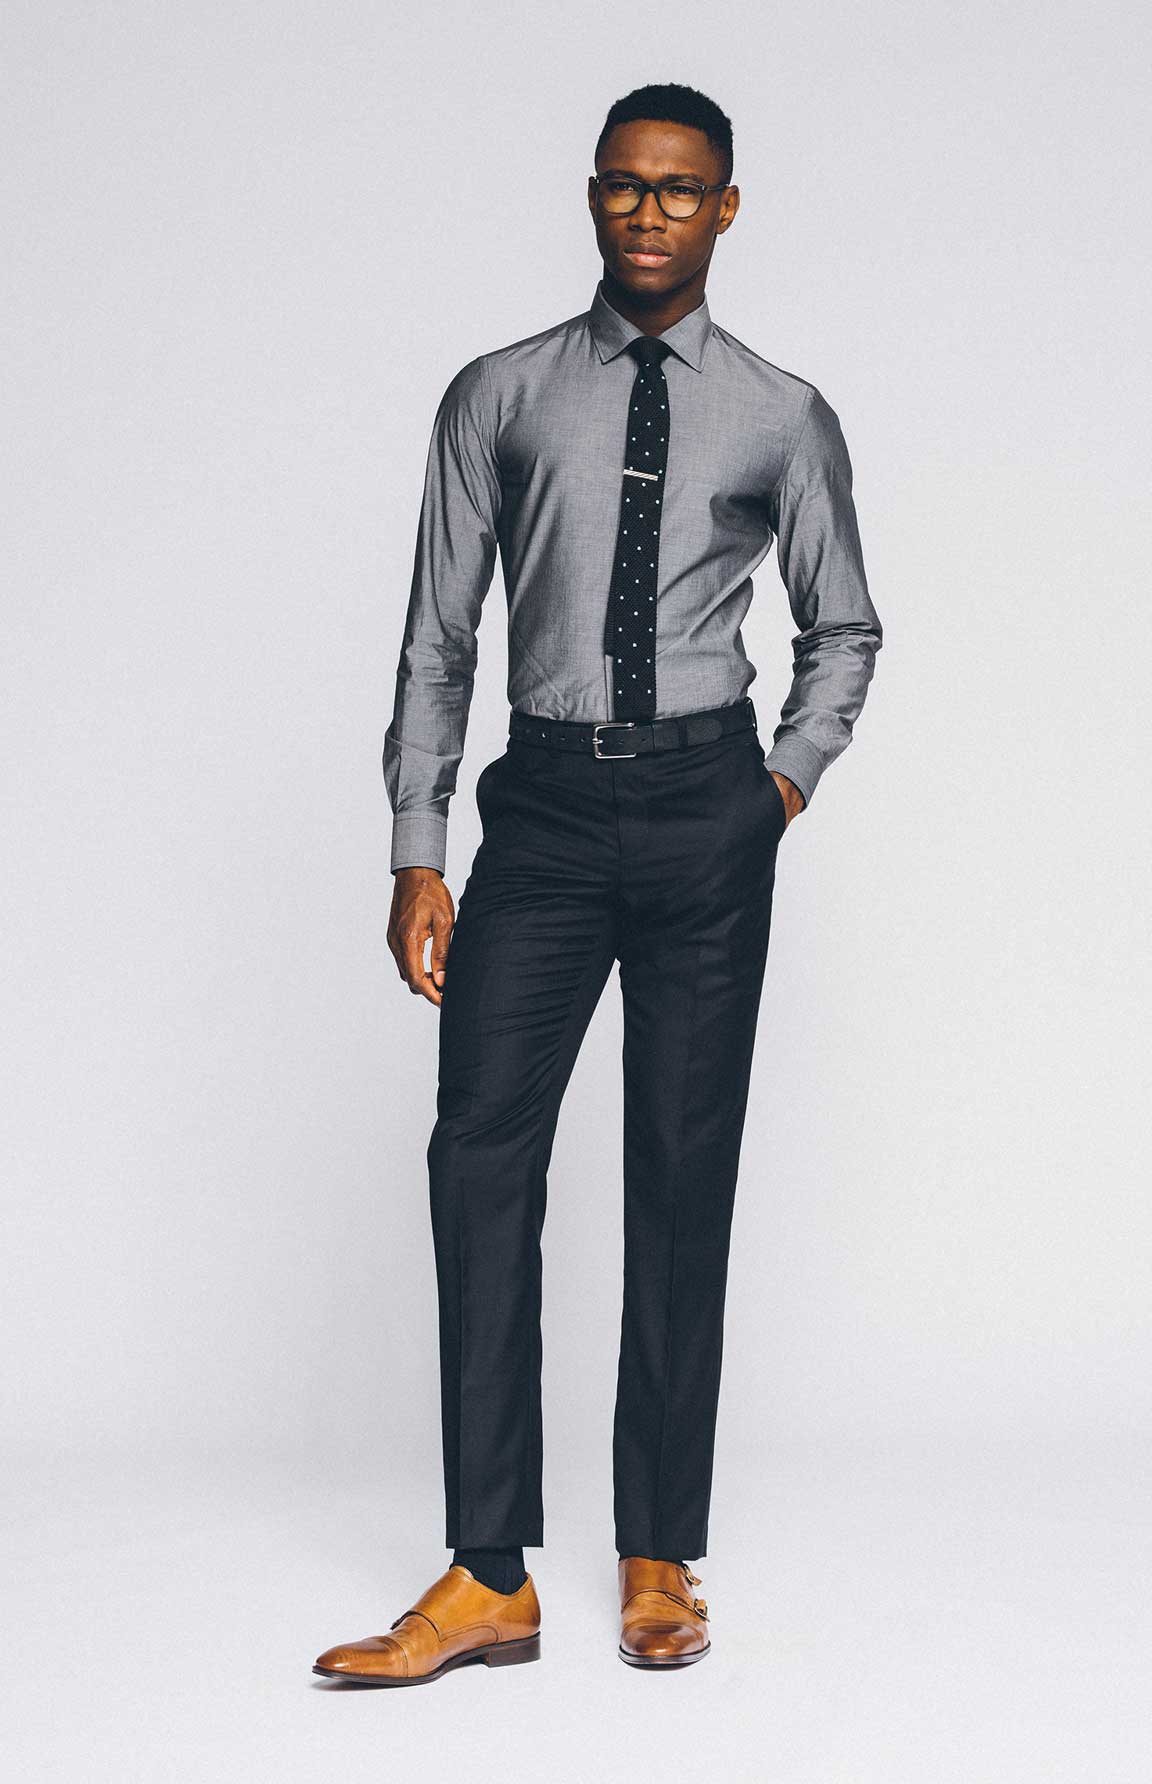 Our Favorite Menswear Rules to Break | Indochino Blog